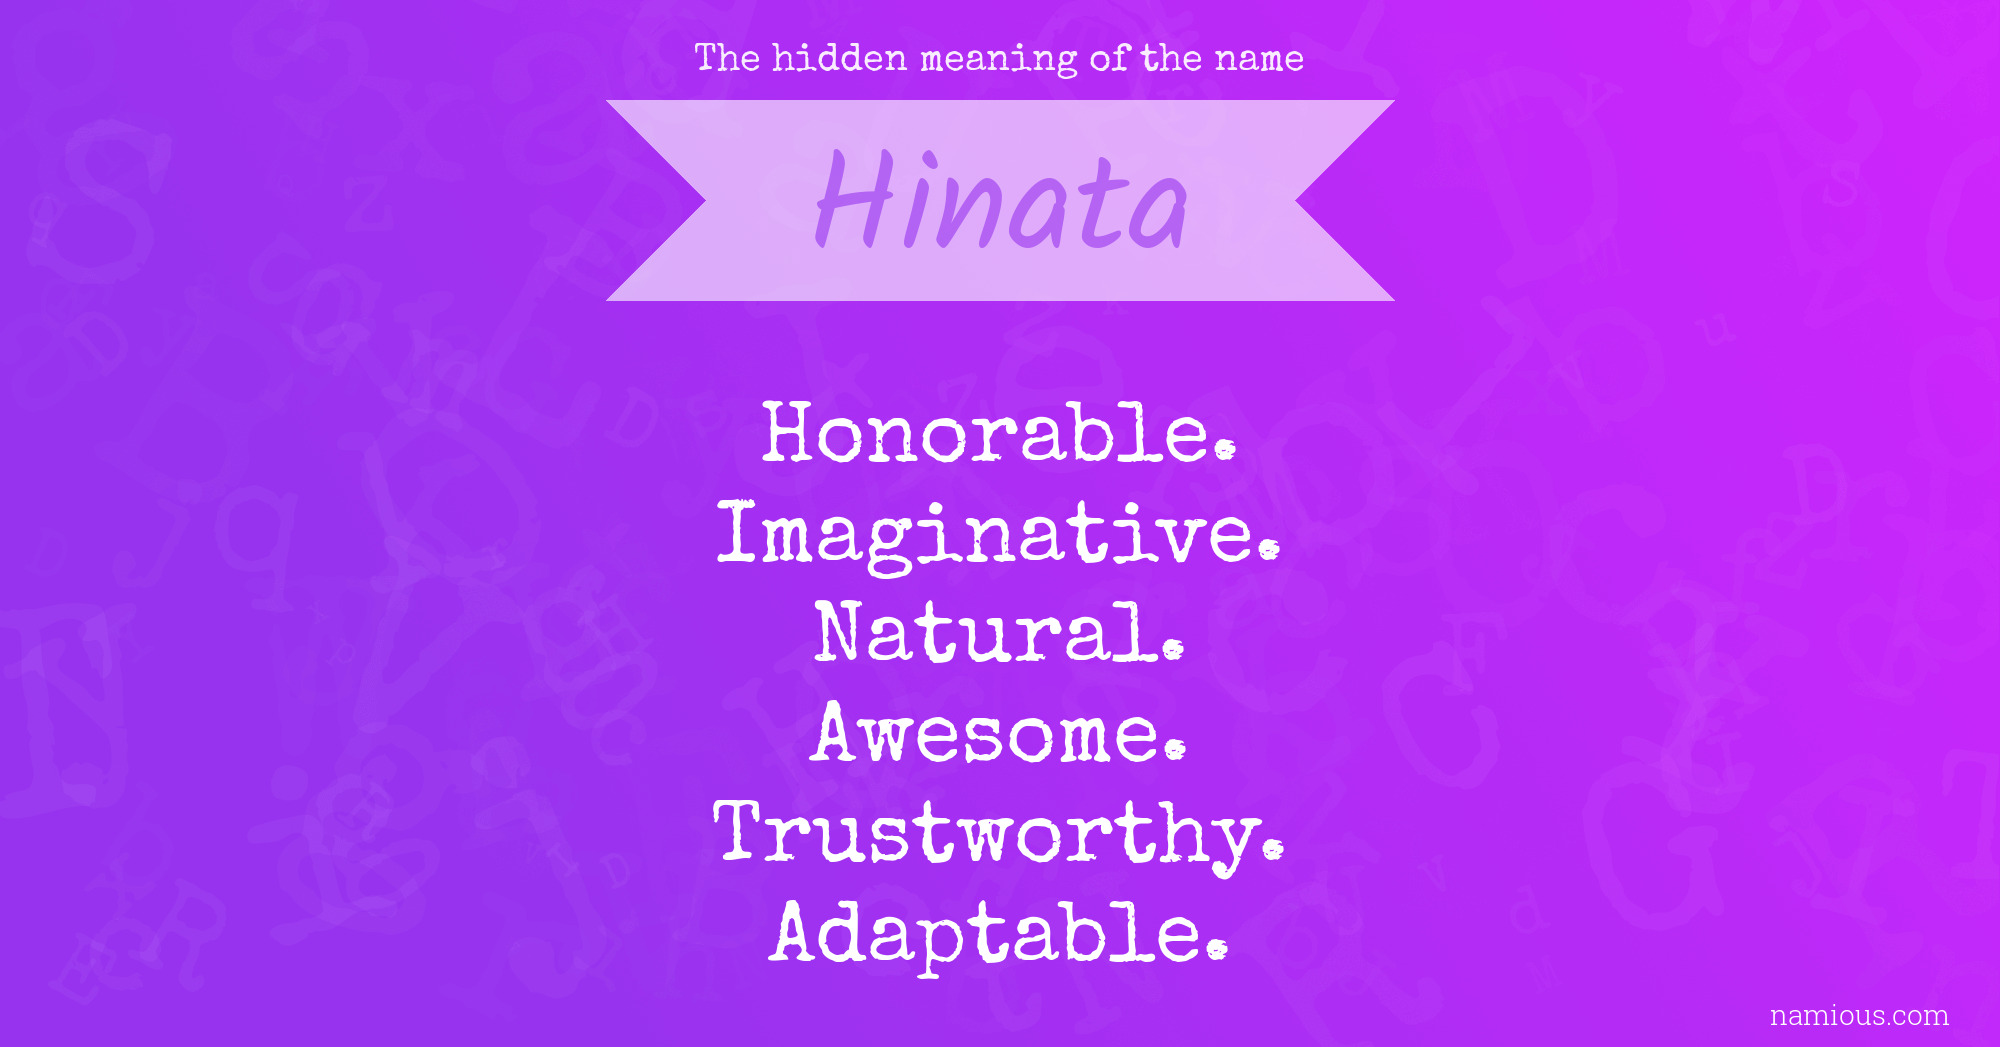 The hidden meaning of the name Hinata